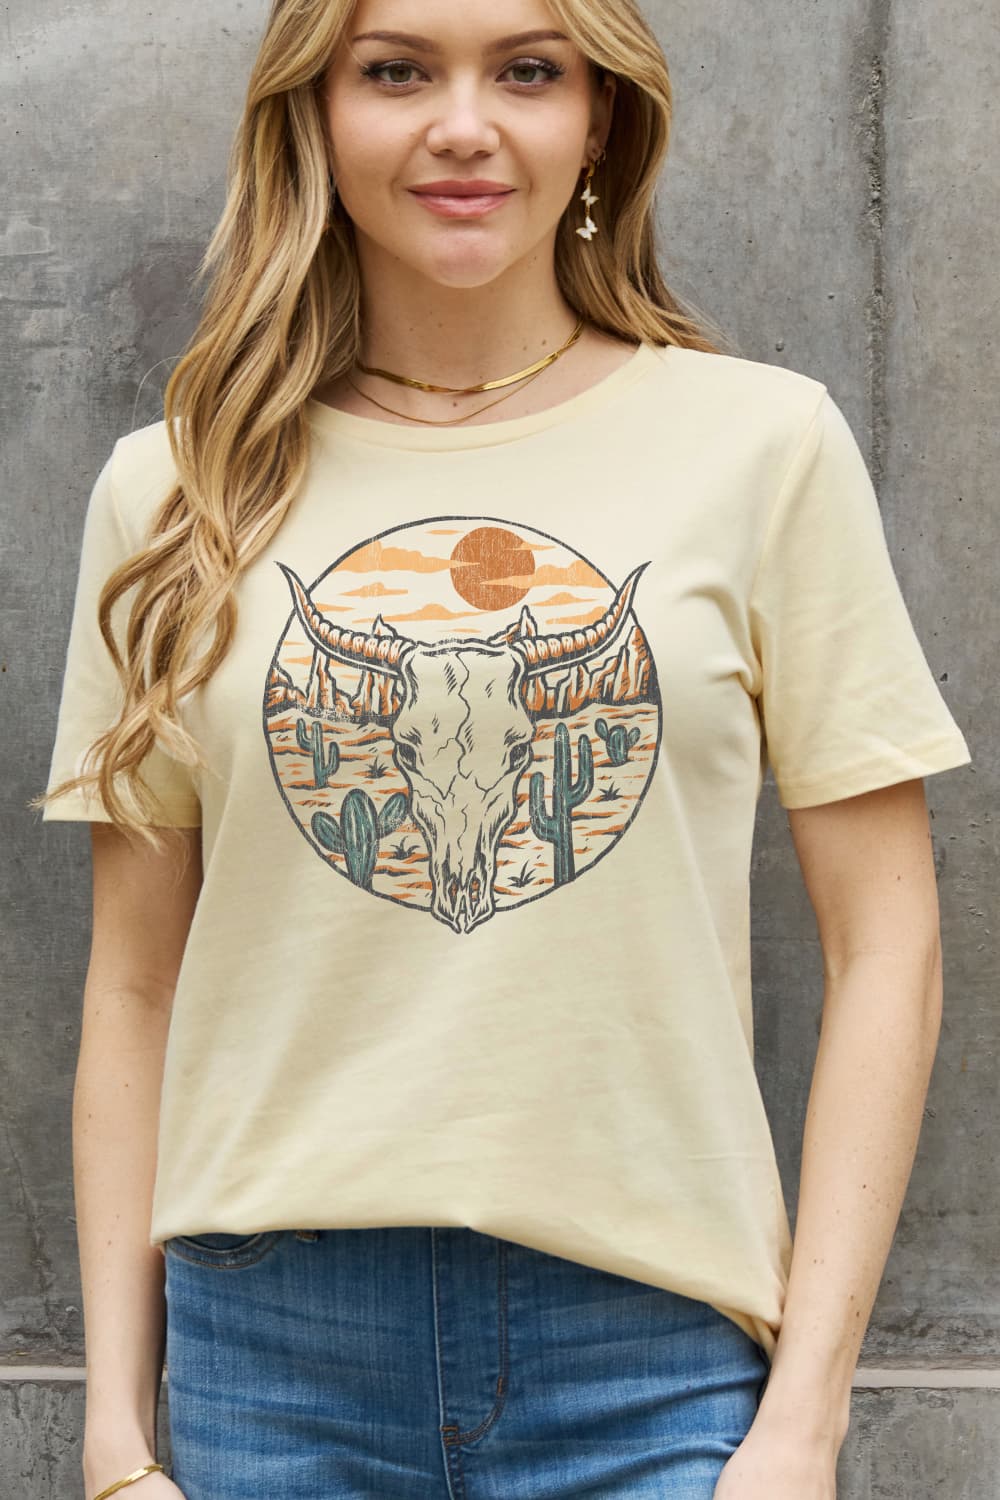 Simply Love Full Size Bull Cactus Graphic Cotton Tee